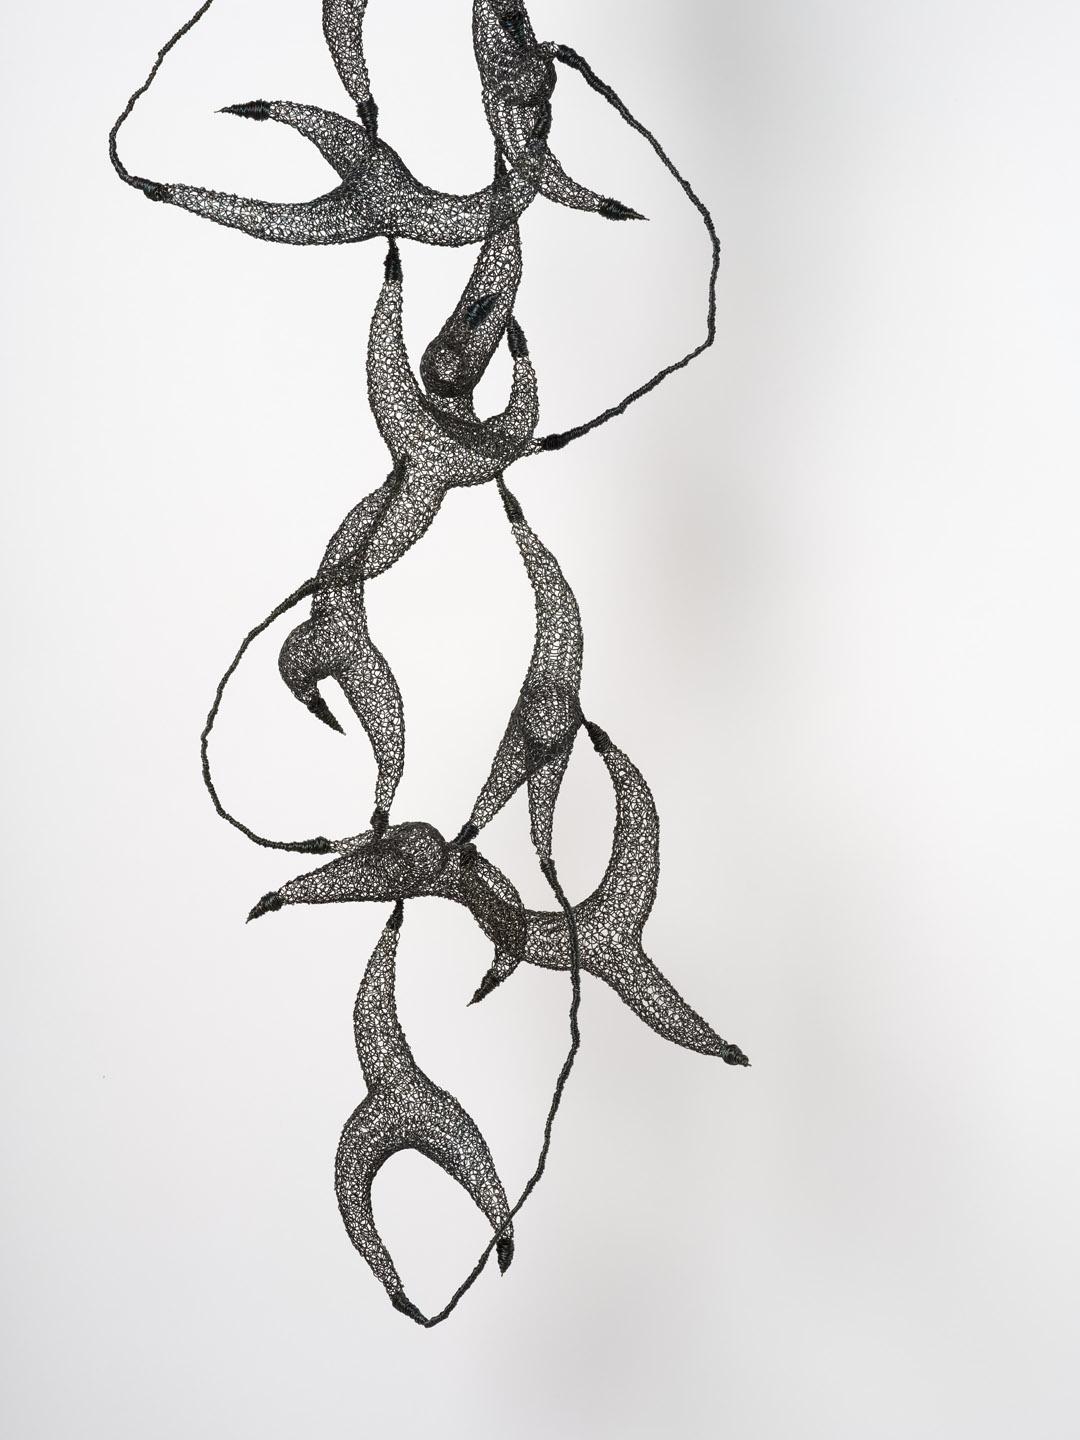 This woven metallic sculpture is created and shaped by Delphine Grandvaux directly from annealed iron wire.

As a new pronoun in French, 